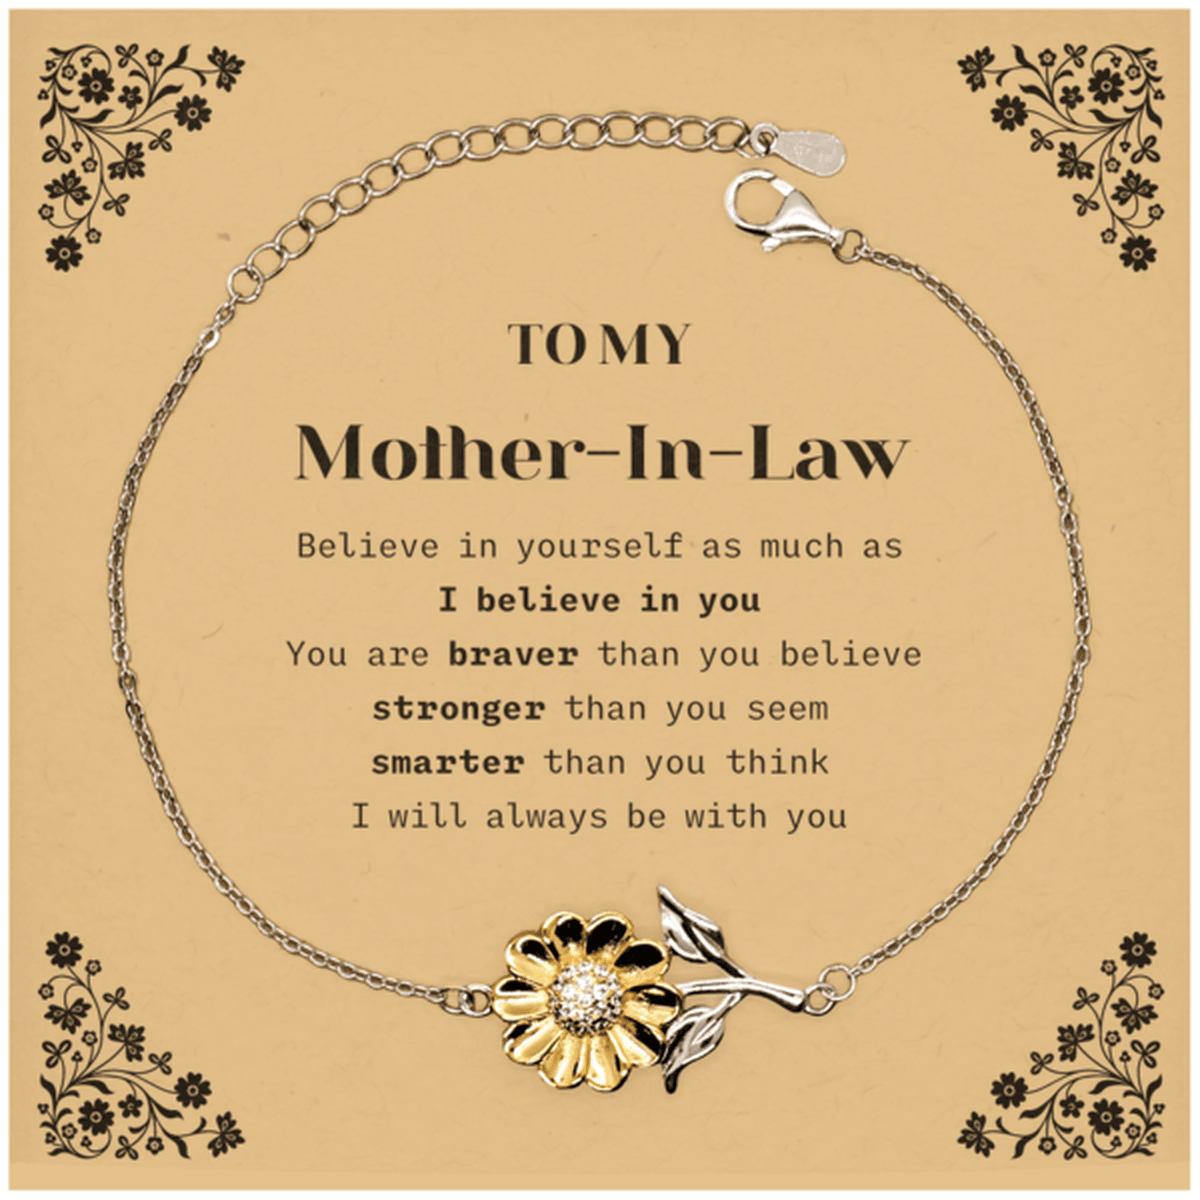 Mother-In-Law Sunflower Bracelet Gifts, To My Mother-In-Law You are braver than you believe, stronger than you seem, Inspirational Gifts For Mother-In-Law Card, Birthday, Christmas Gifts For Mother-In-Law Men Women